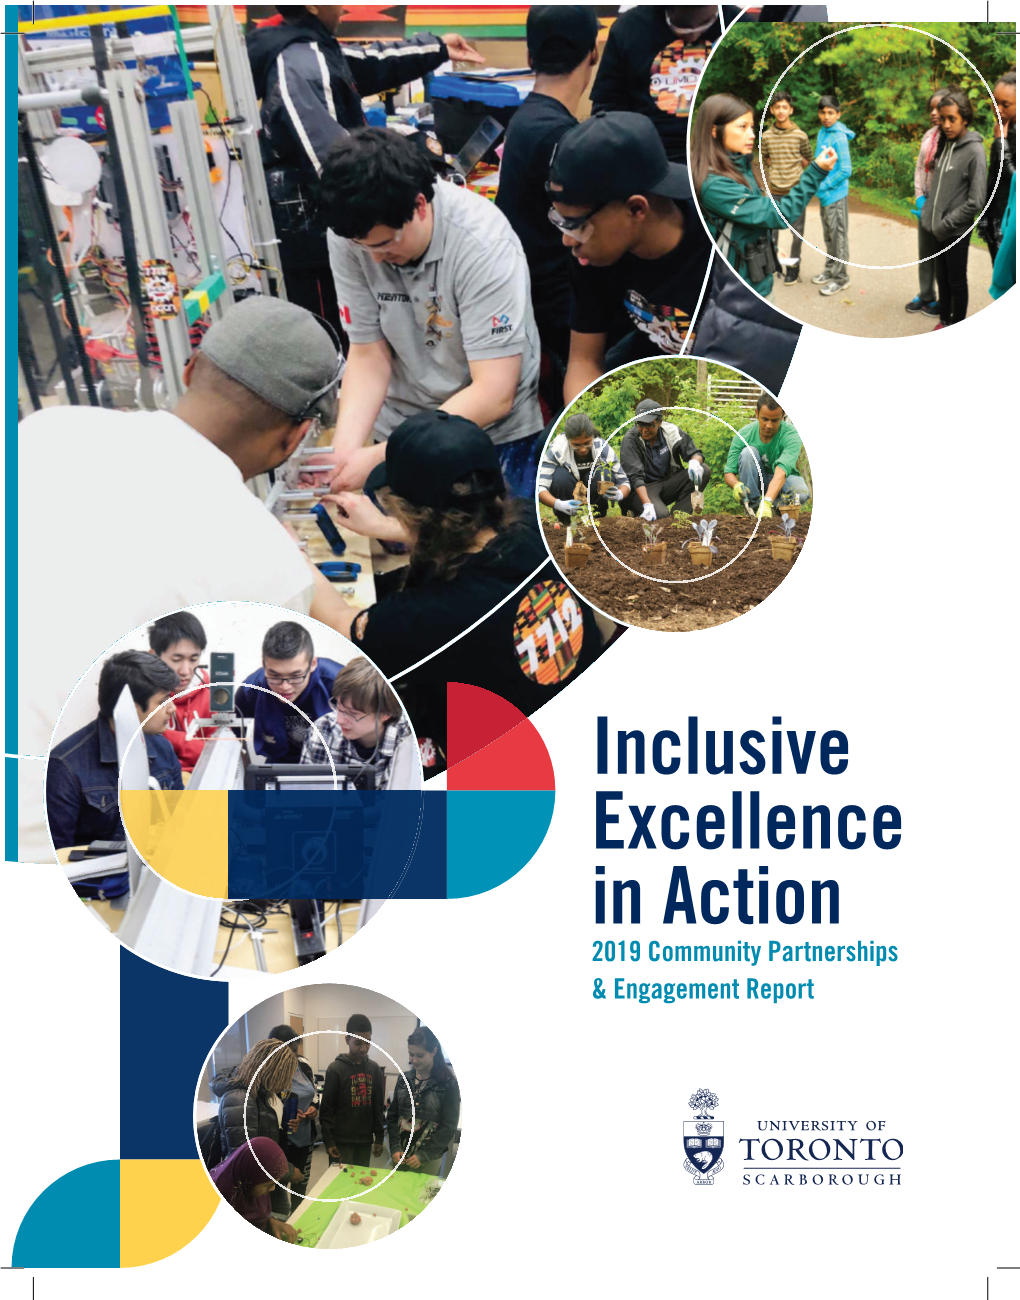 Inclusive Excellence in Action